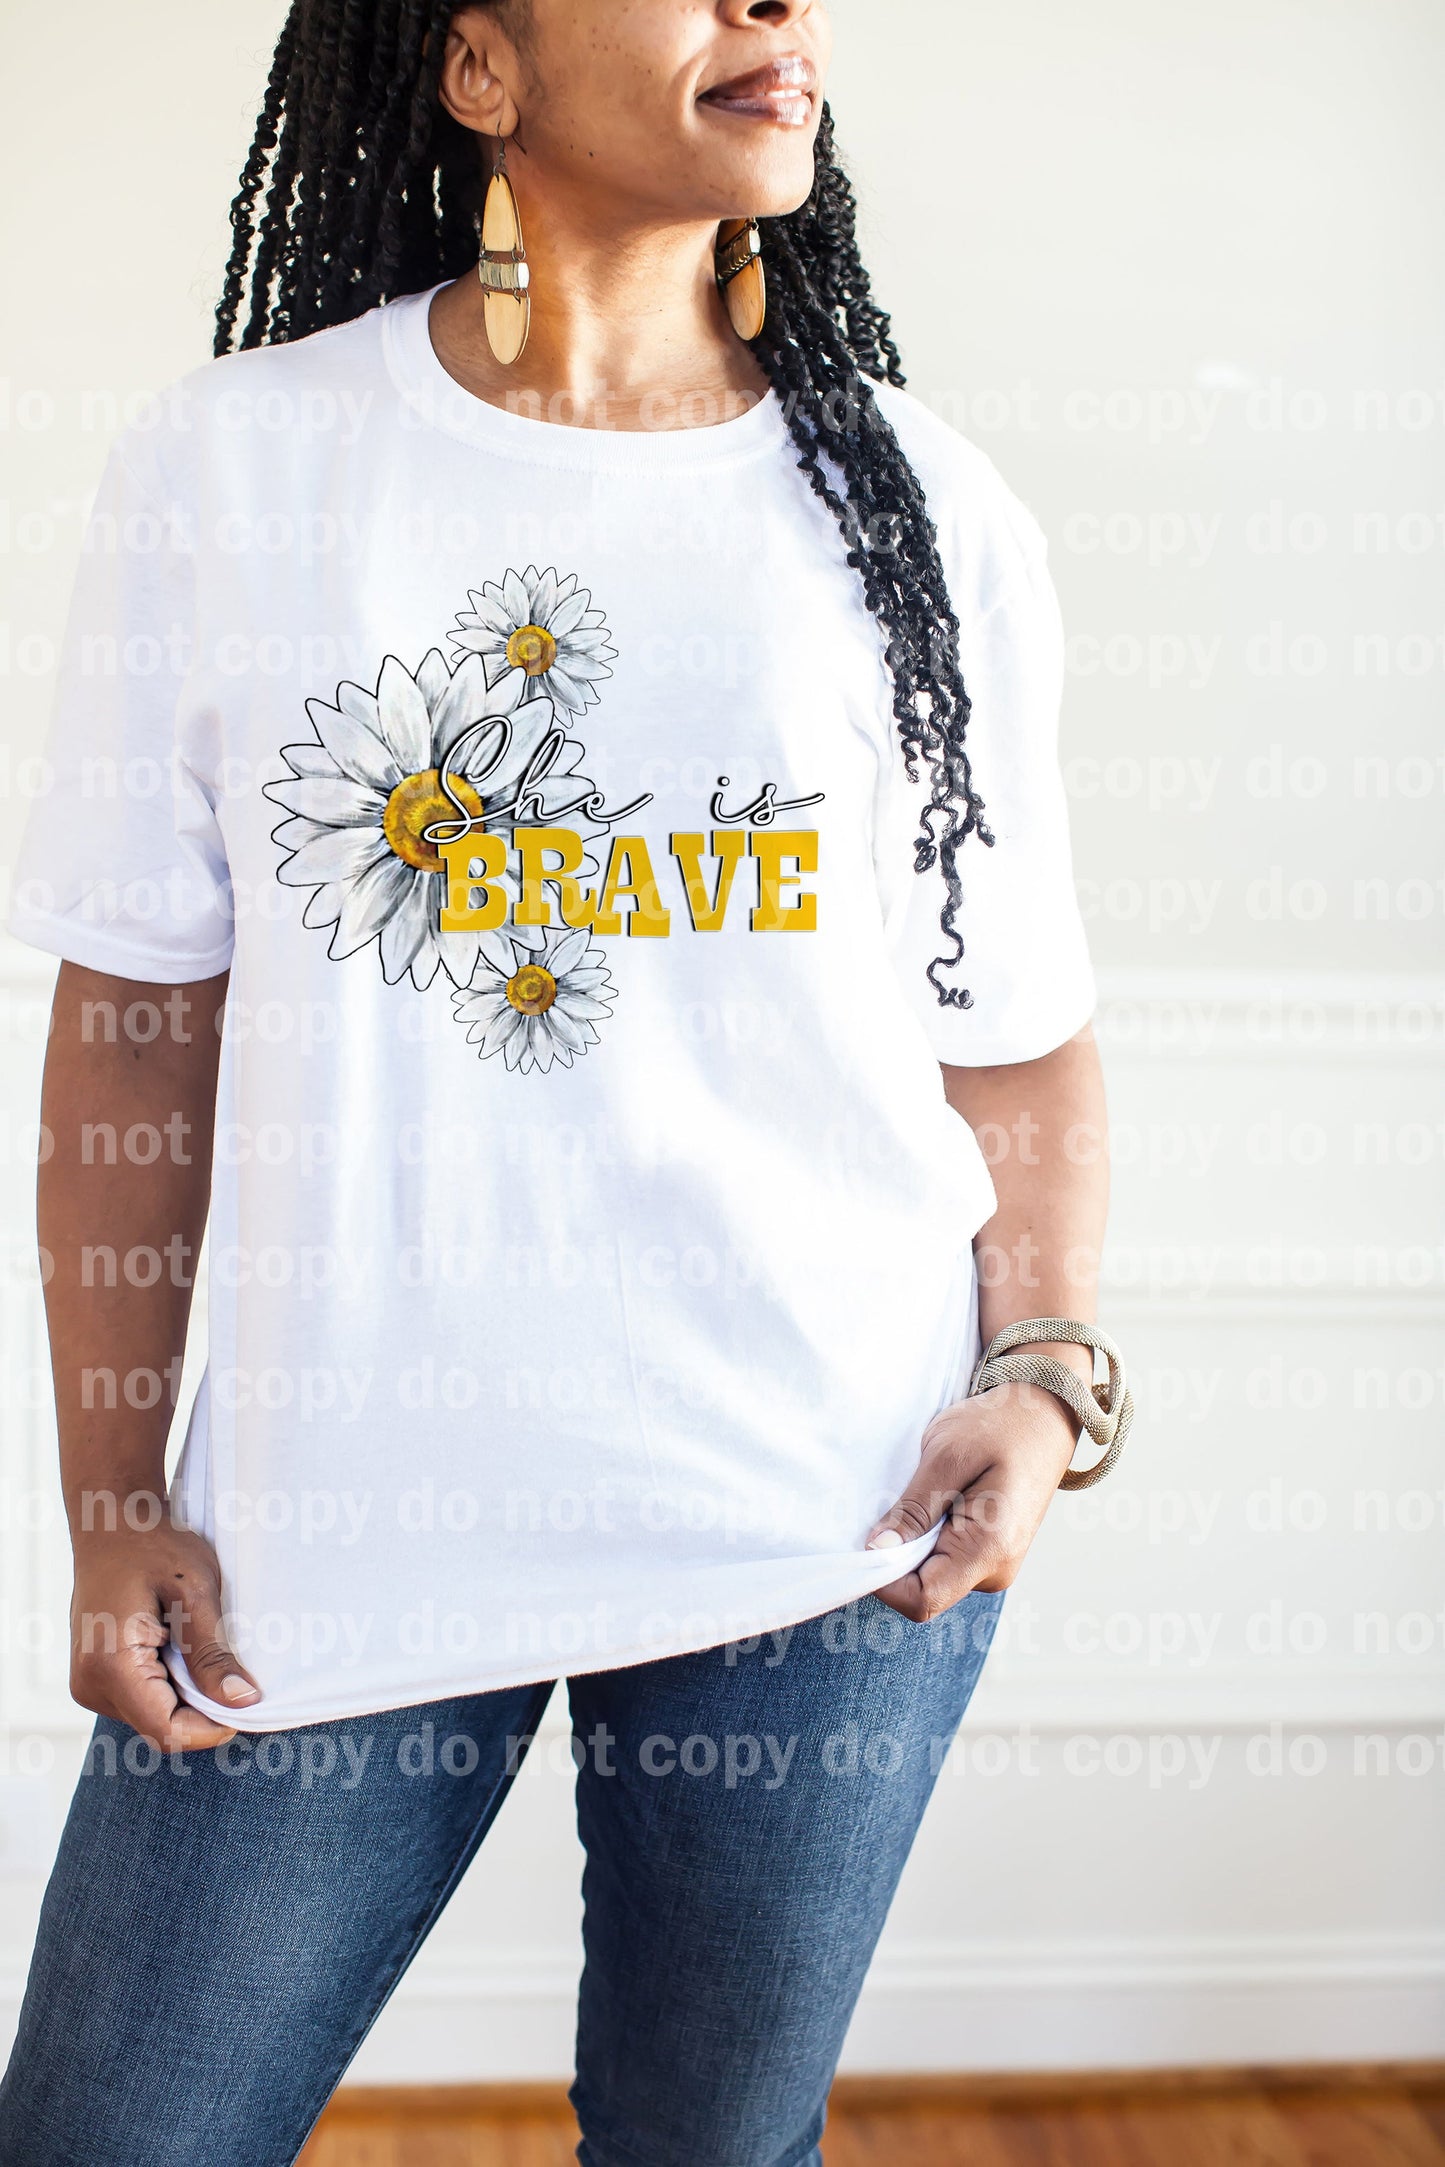 She Is Brave Dream Print or Sublimation Print